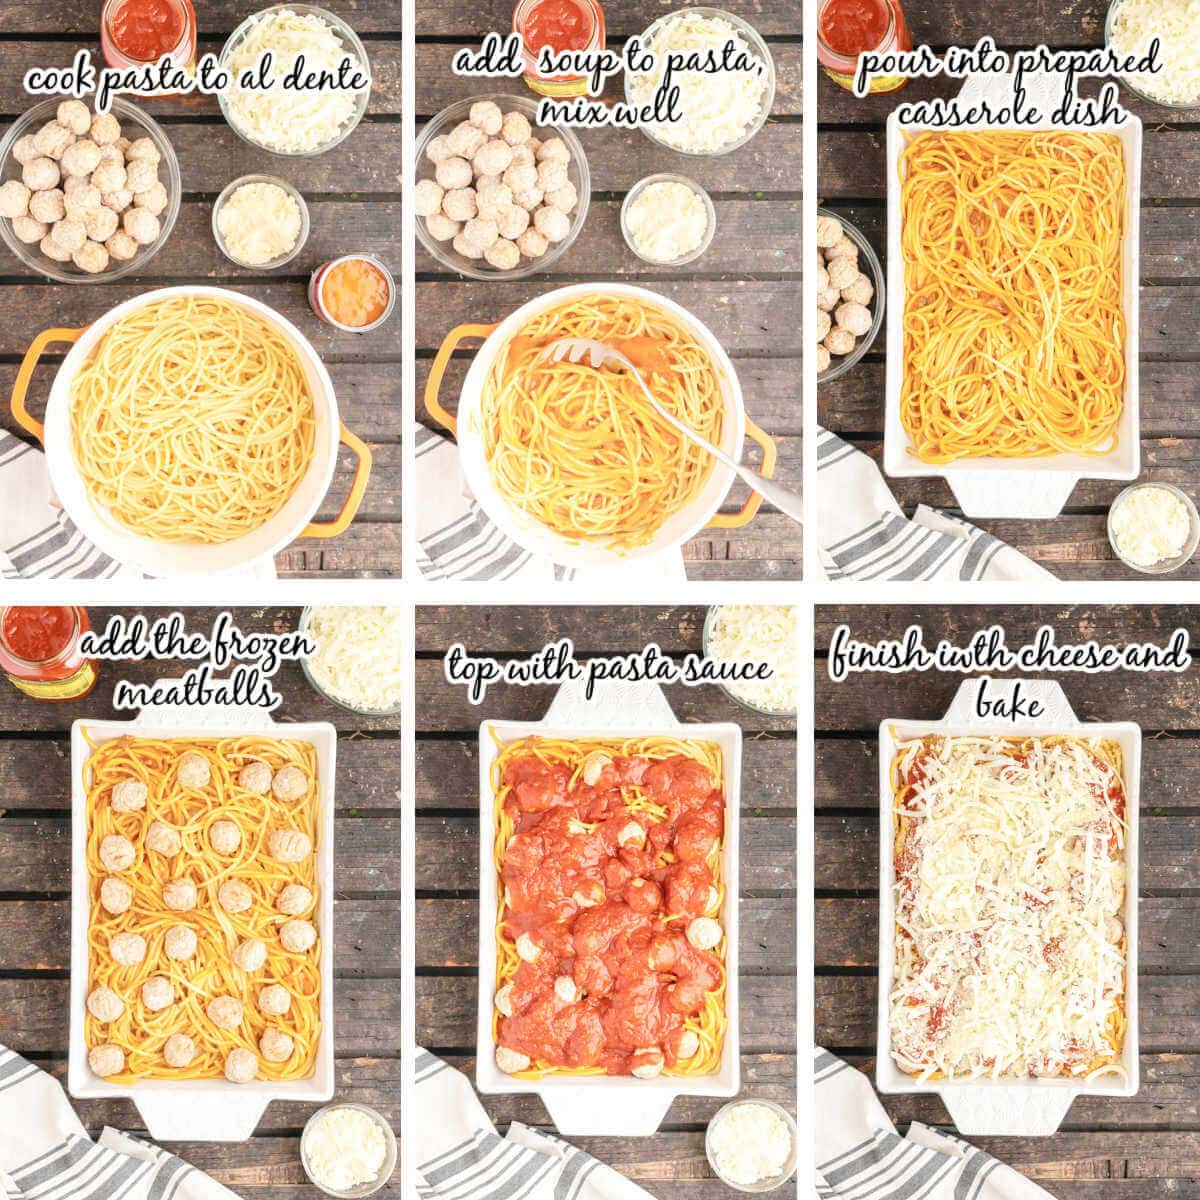 Collage of photos to make pasta casserole dish, with print overlay.